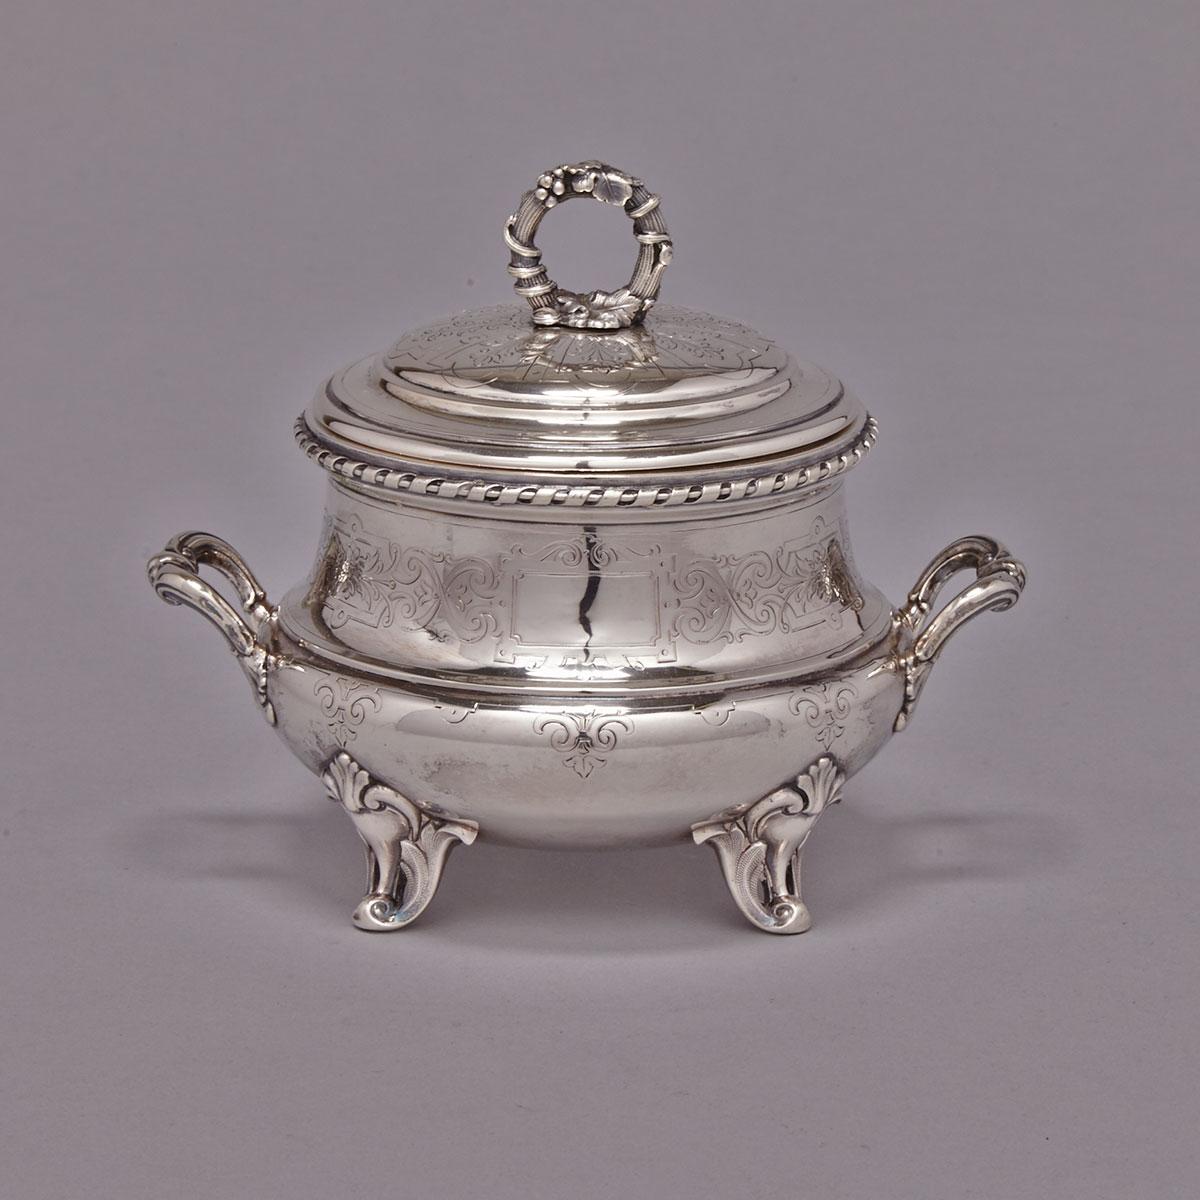 Continental Silver Covered Sugar Basin, probably German, late 19th century